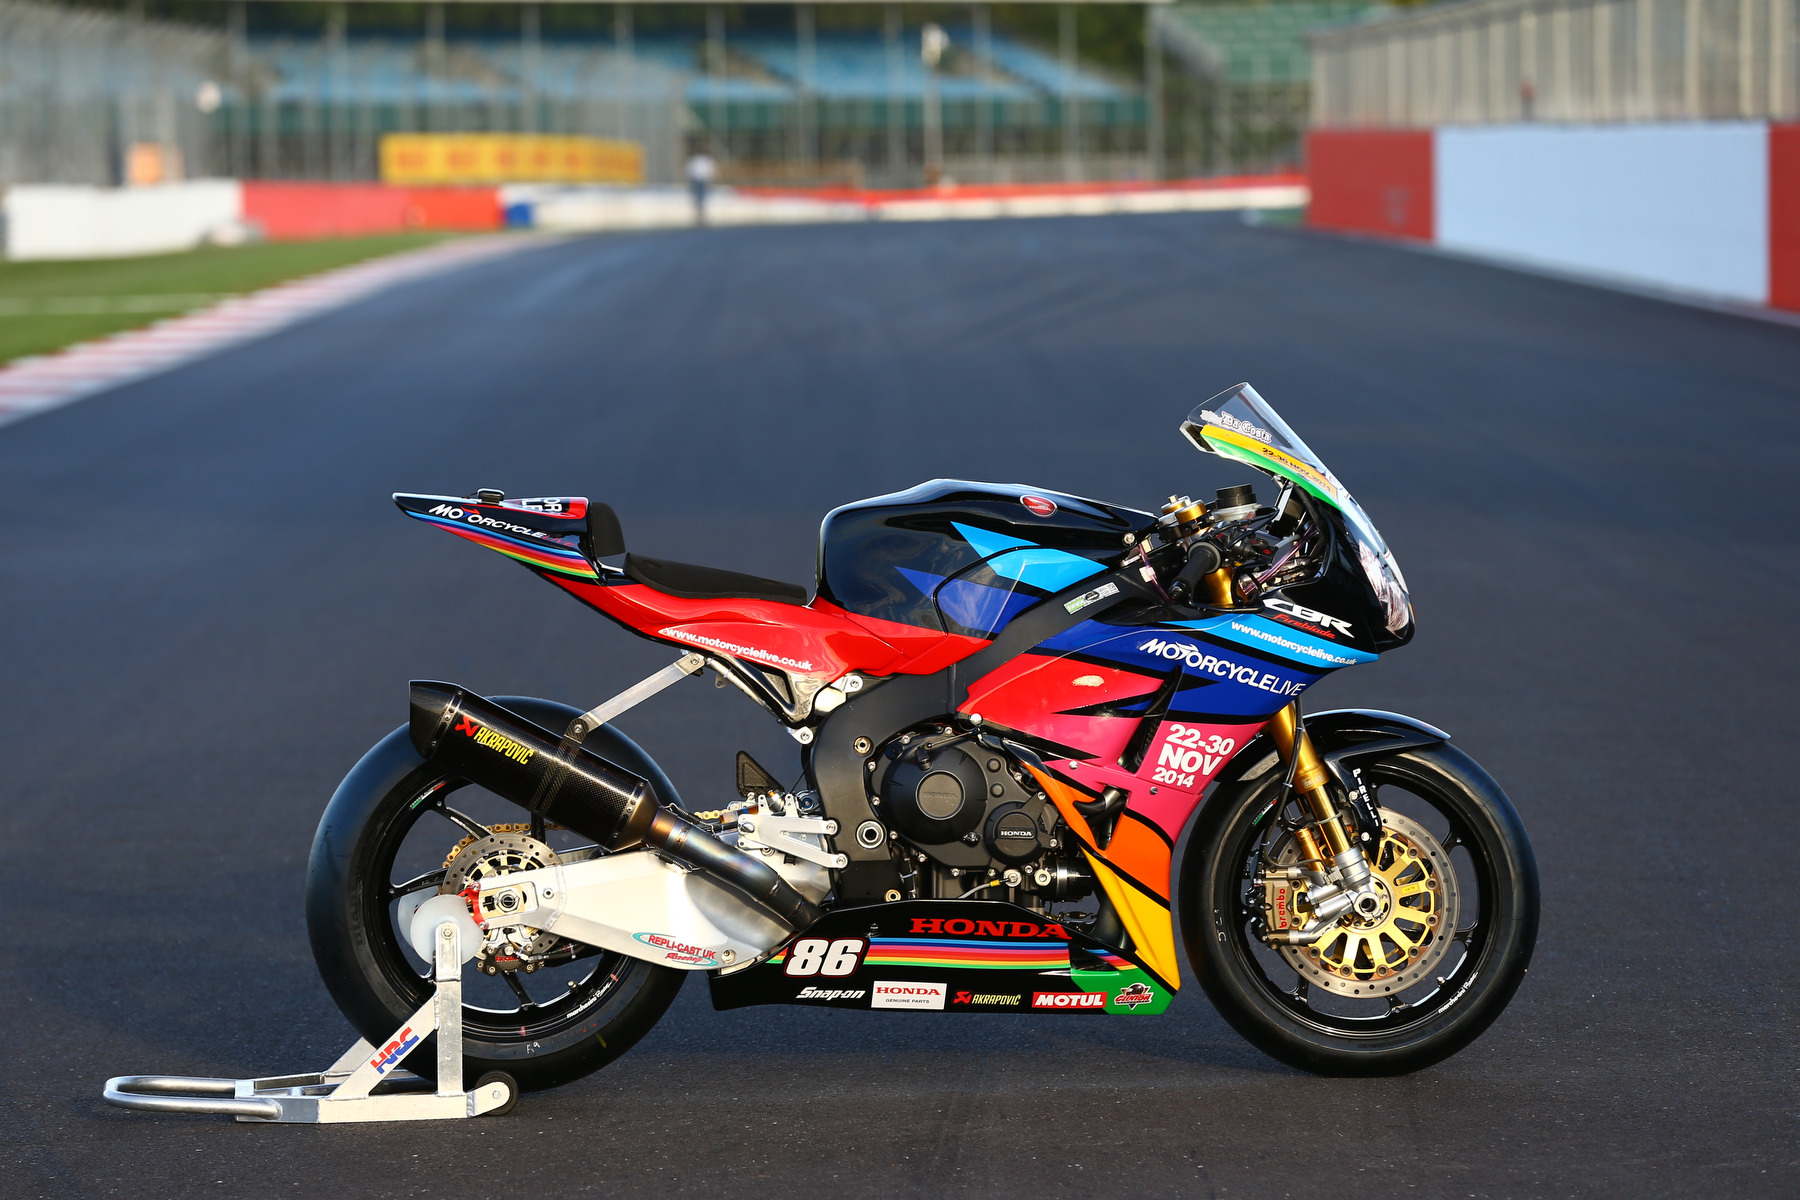 Motorcycle Live livery Fireblade to race at Silverstone Visordown